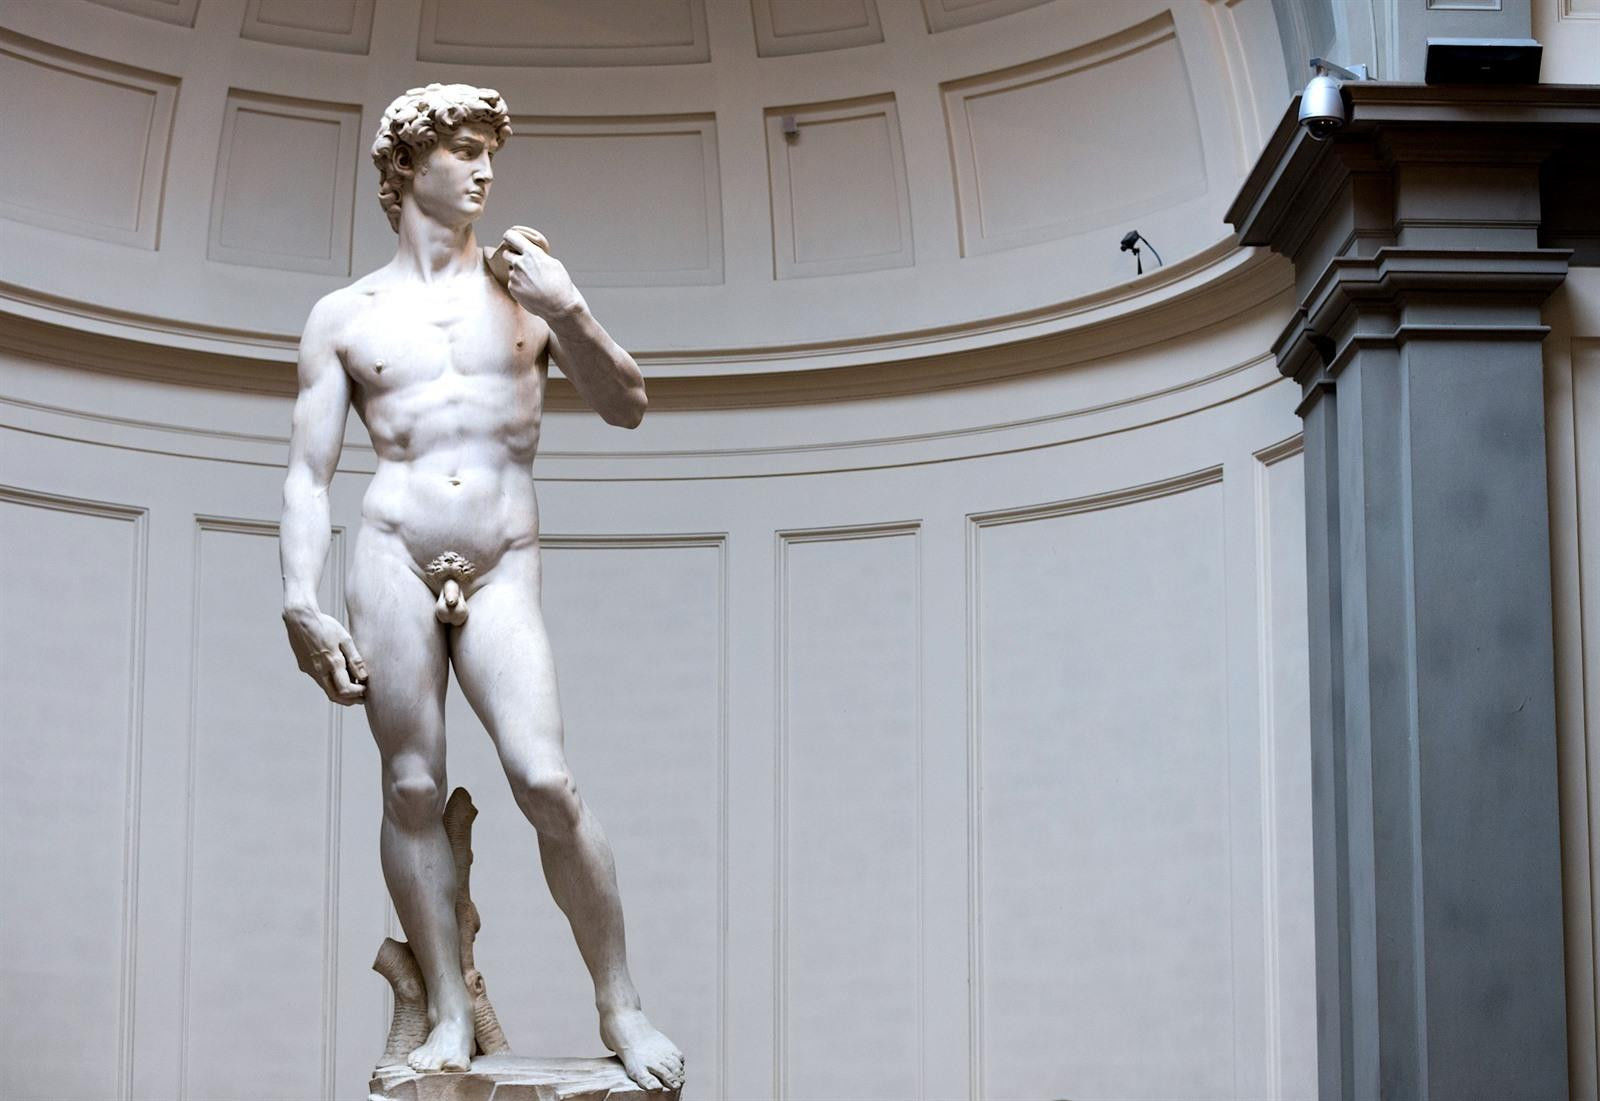 The Marble Sculpture 'David' Facing the Giant Goliath Fearlessly, Michelangelo, 1501